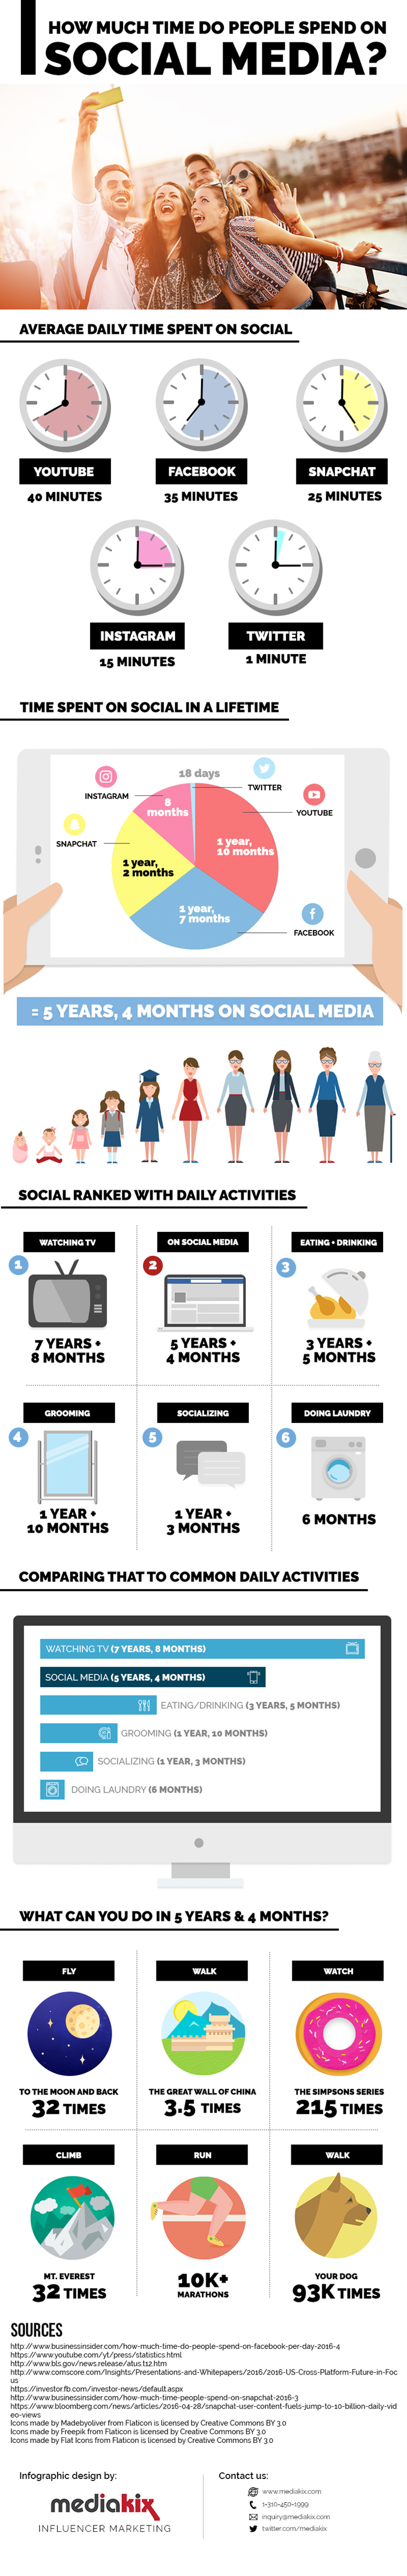 how-much-time-is-spent-on-social-media1-700